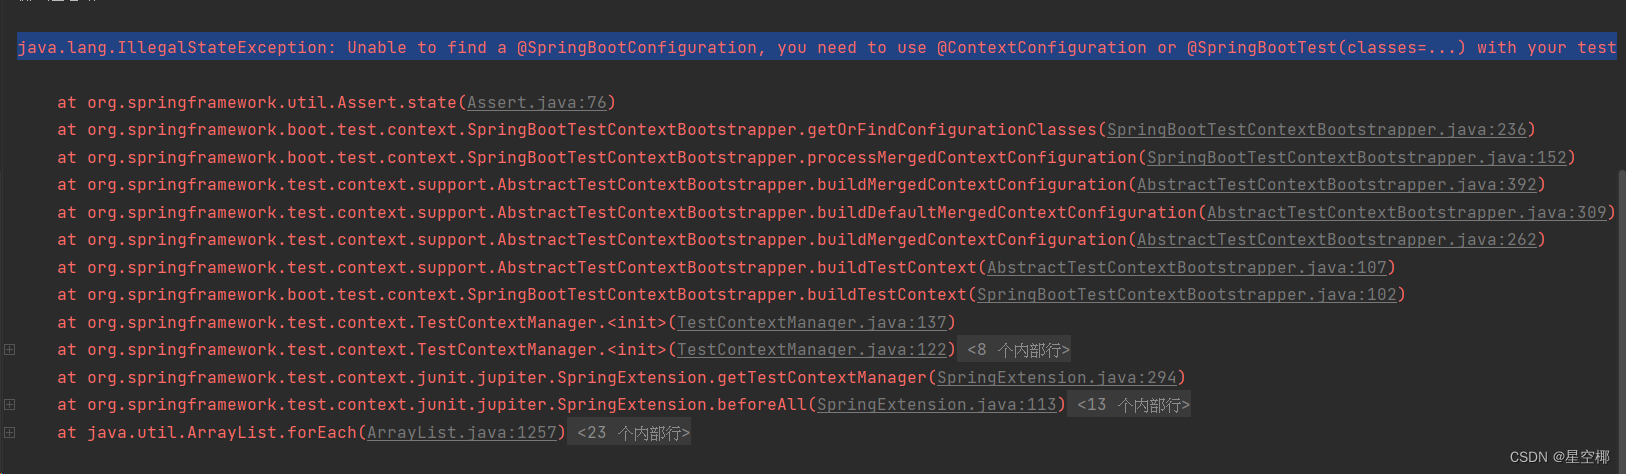 java.lang.IllegalStateException: Unable to find a @SpringBootConfiguration, you need to use @Context